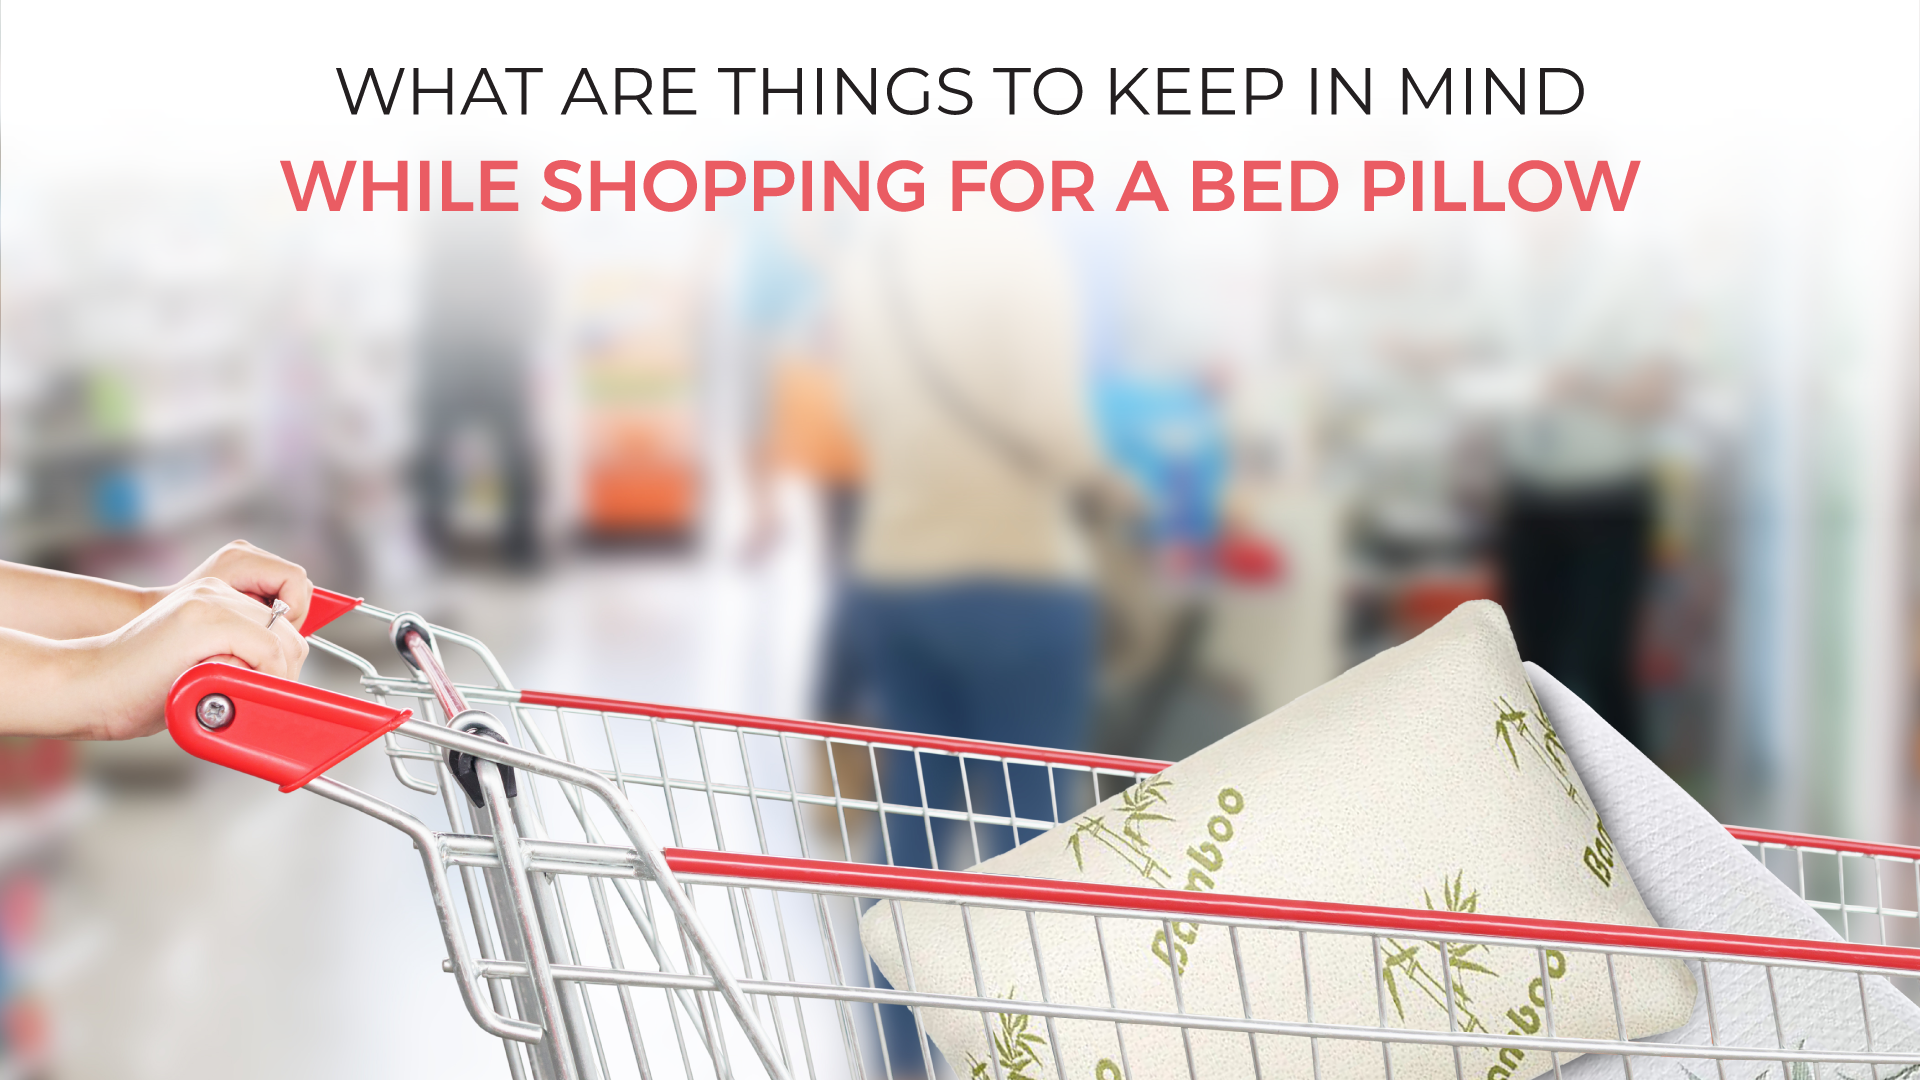 What are Things to Keep in Mind While Shopping for a Bed Pillow?